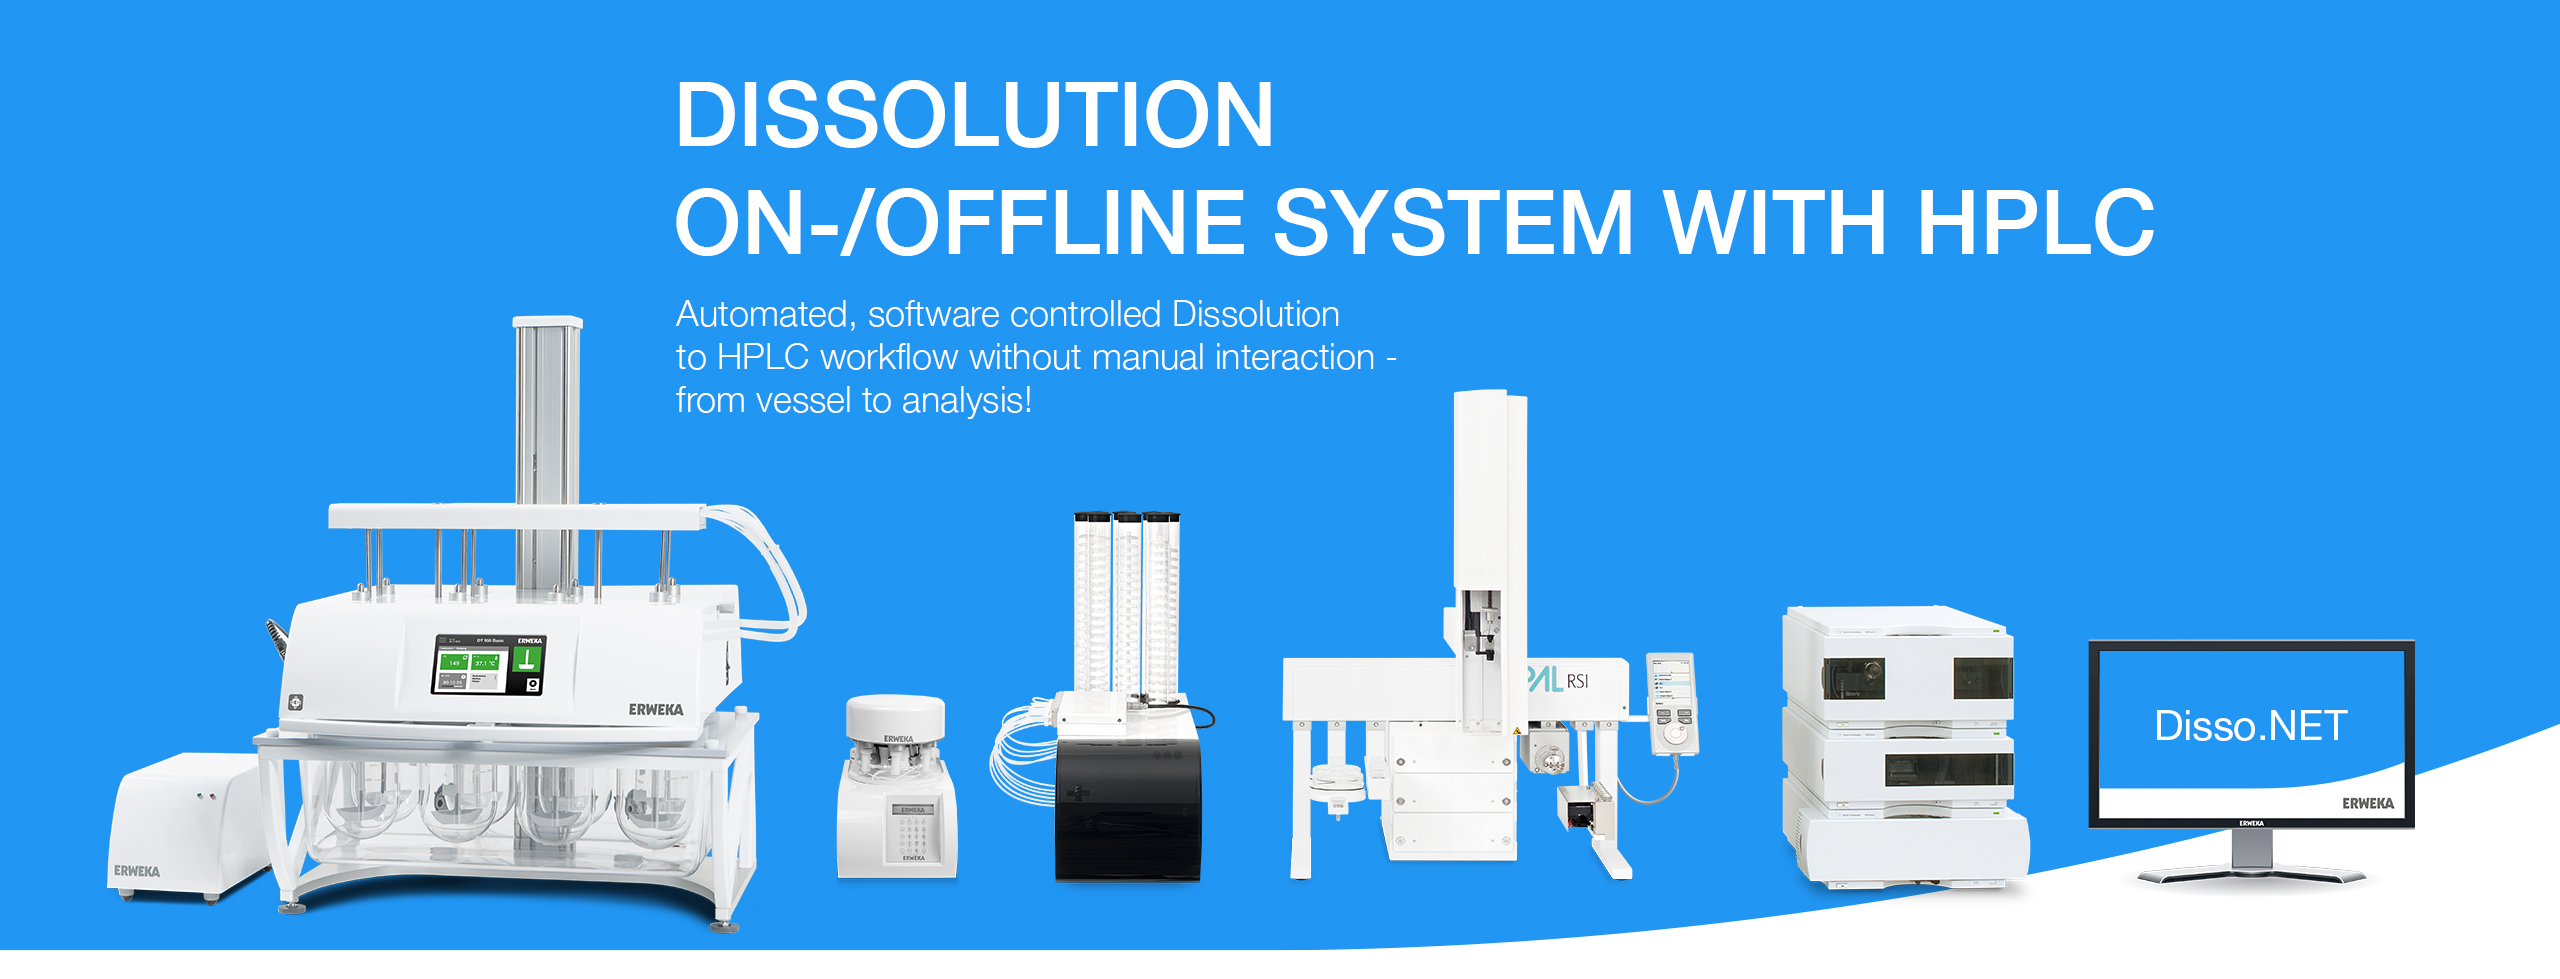 On-/Offline System with HPLC